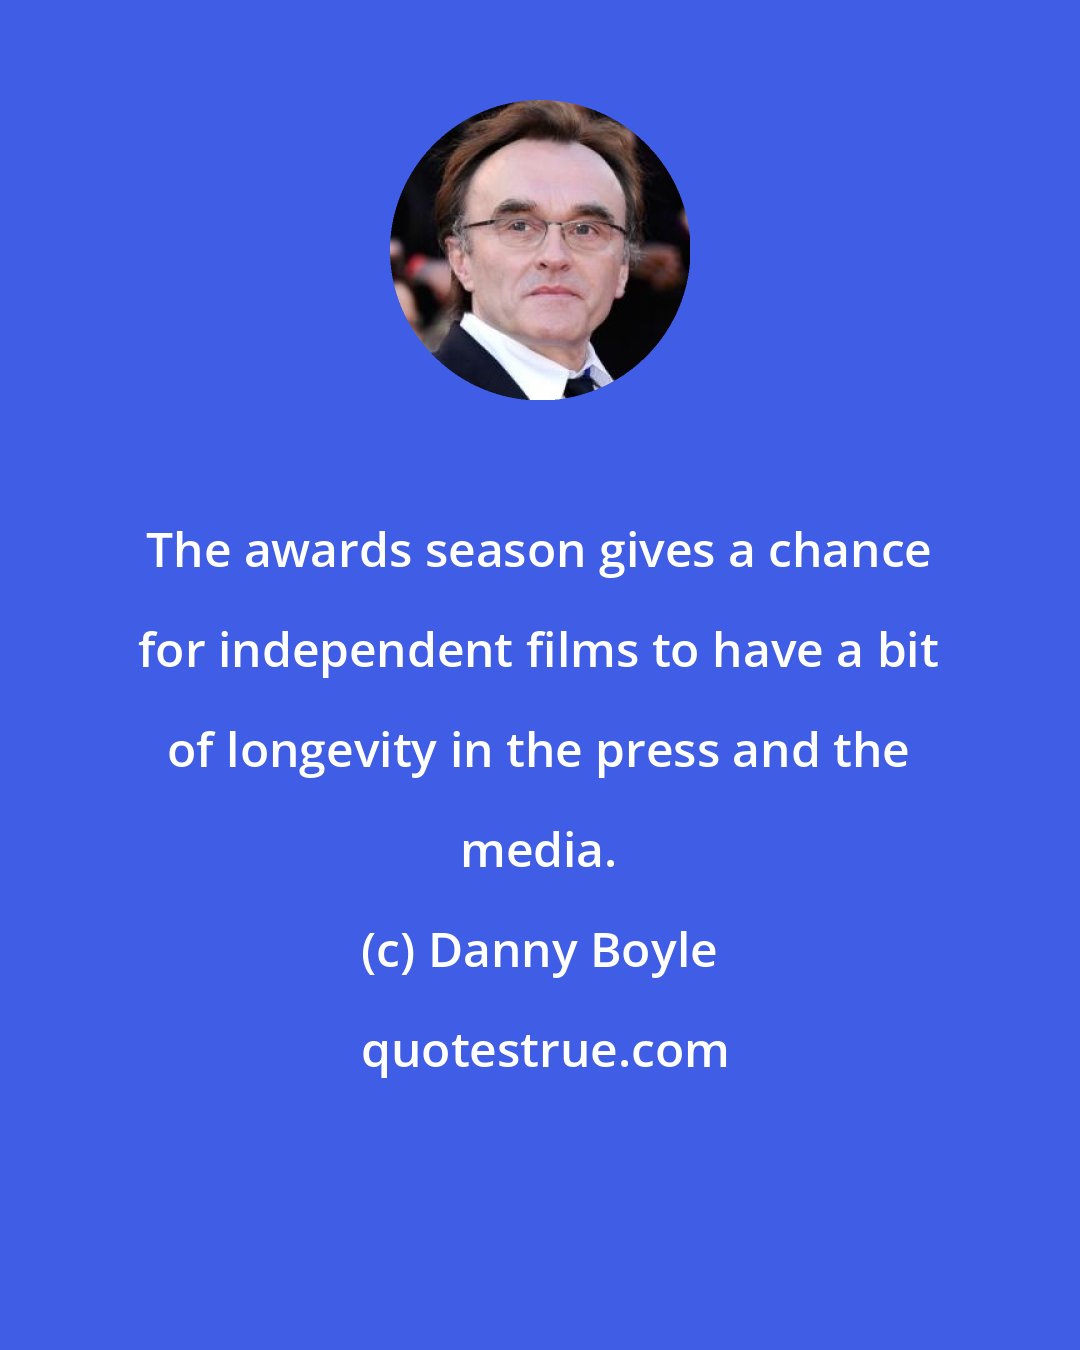 Danny Boyle: The awards season gives a chance for independent films to have a bit of longevity in the press and the media.